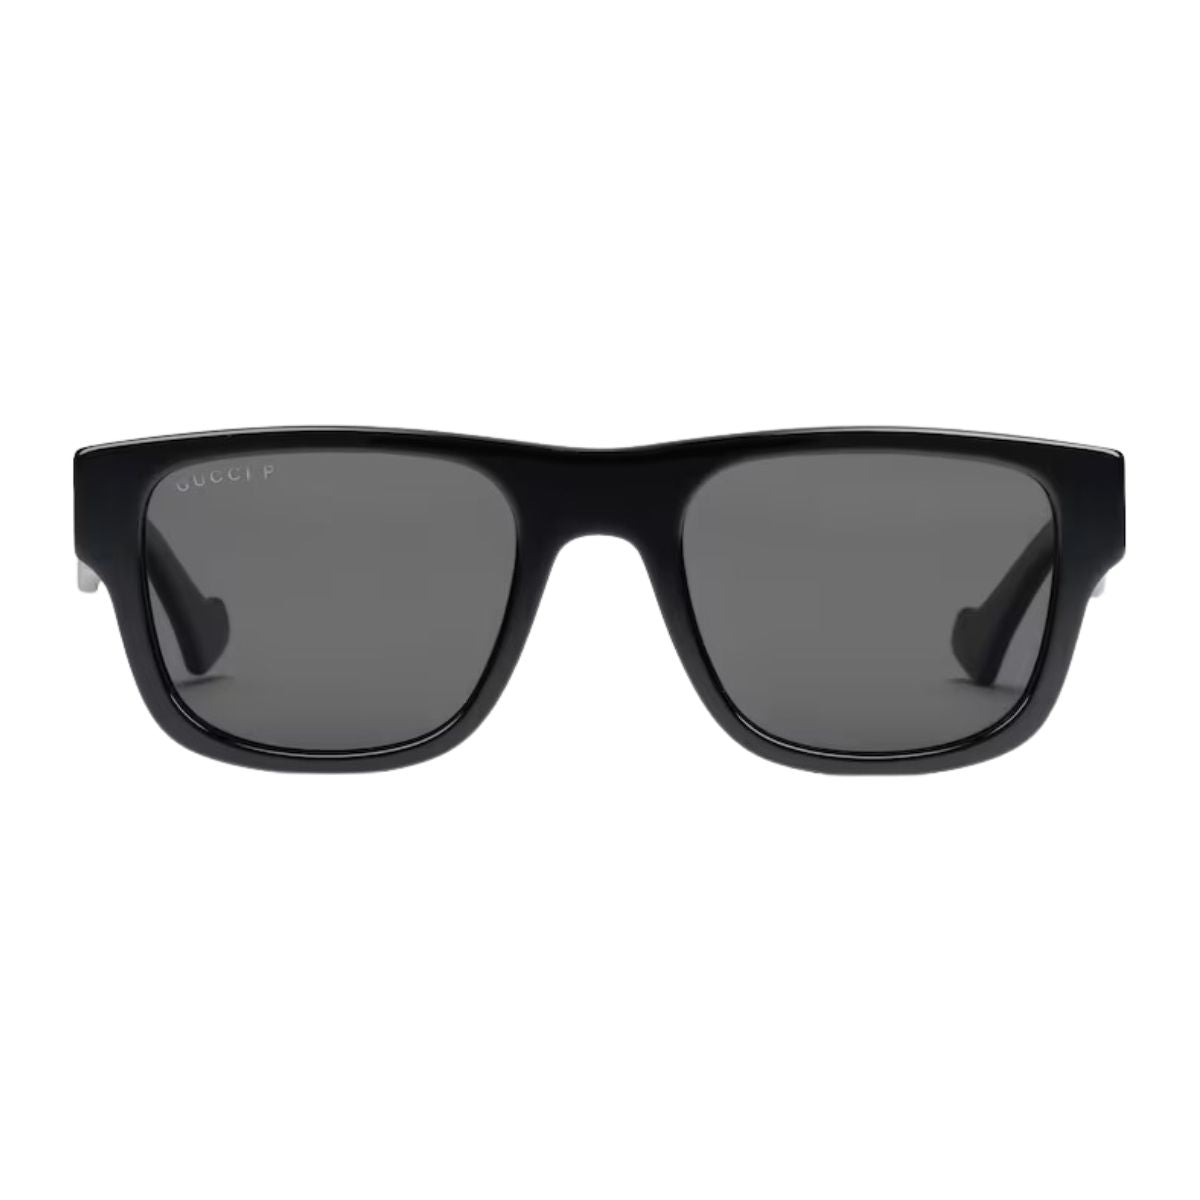 'Branded Gucci Polarized Sunglasses For Mens At Optorium"